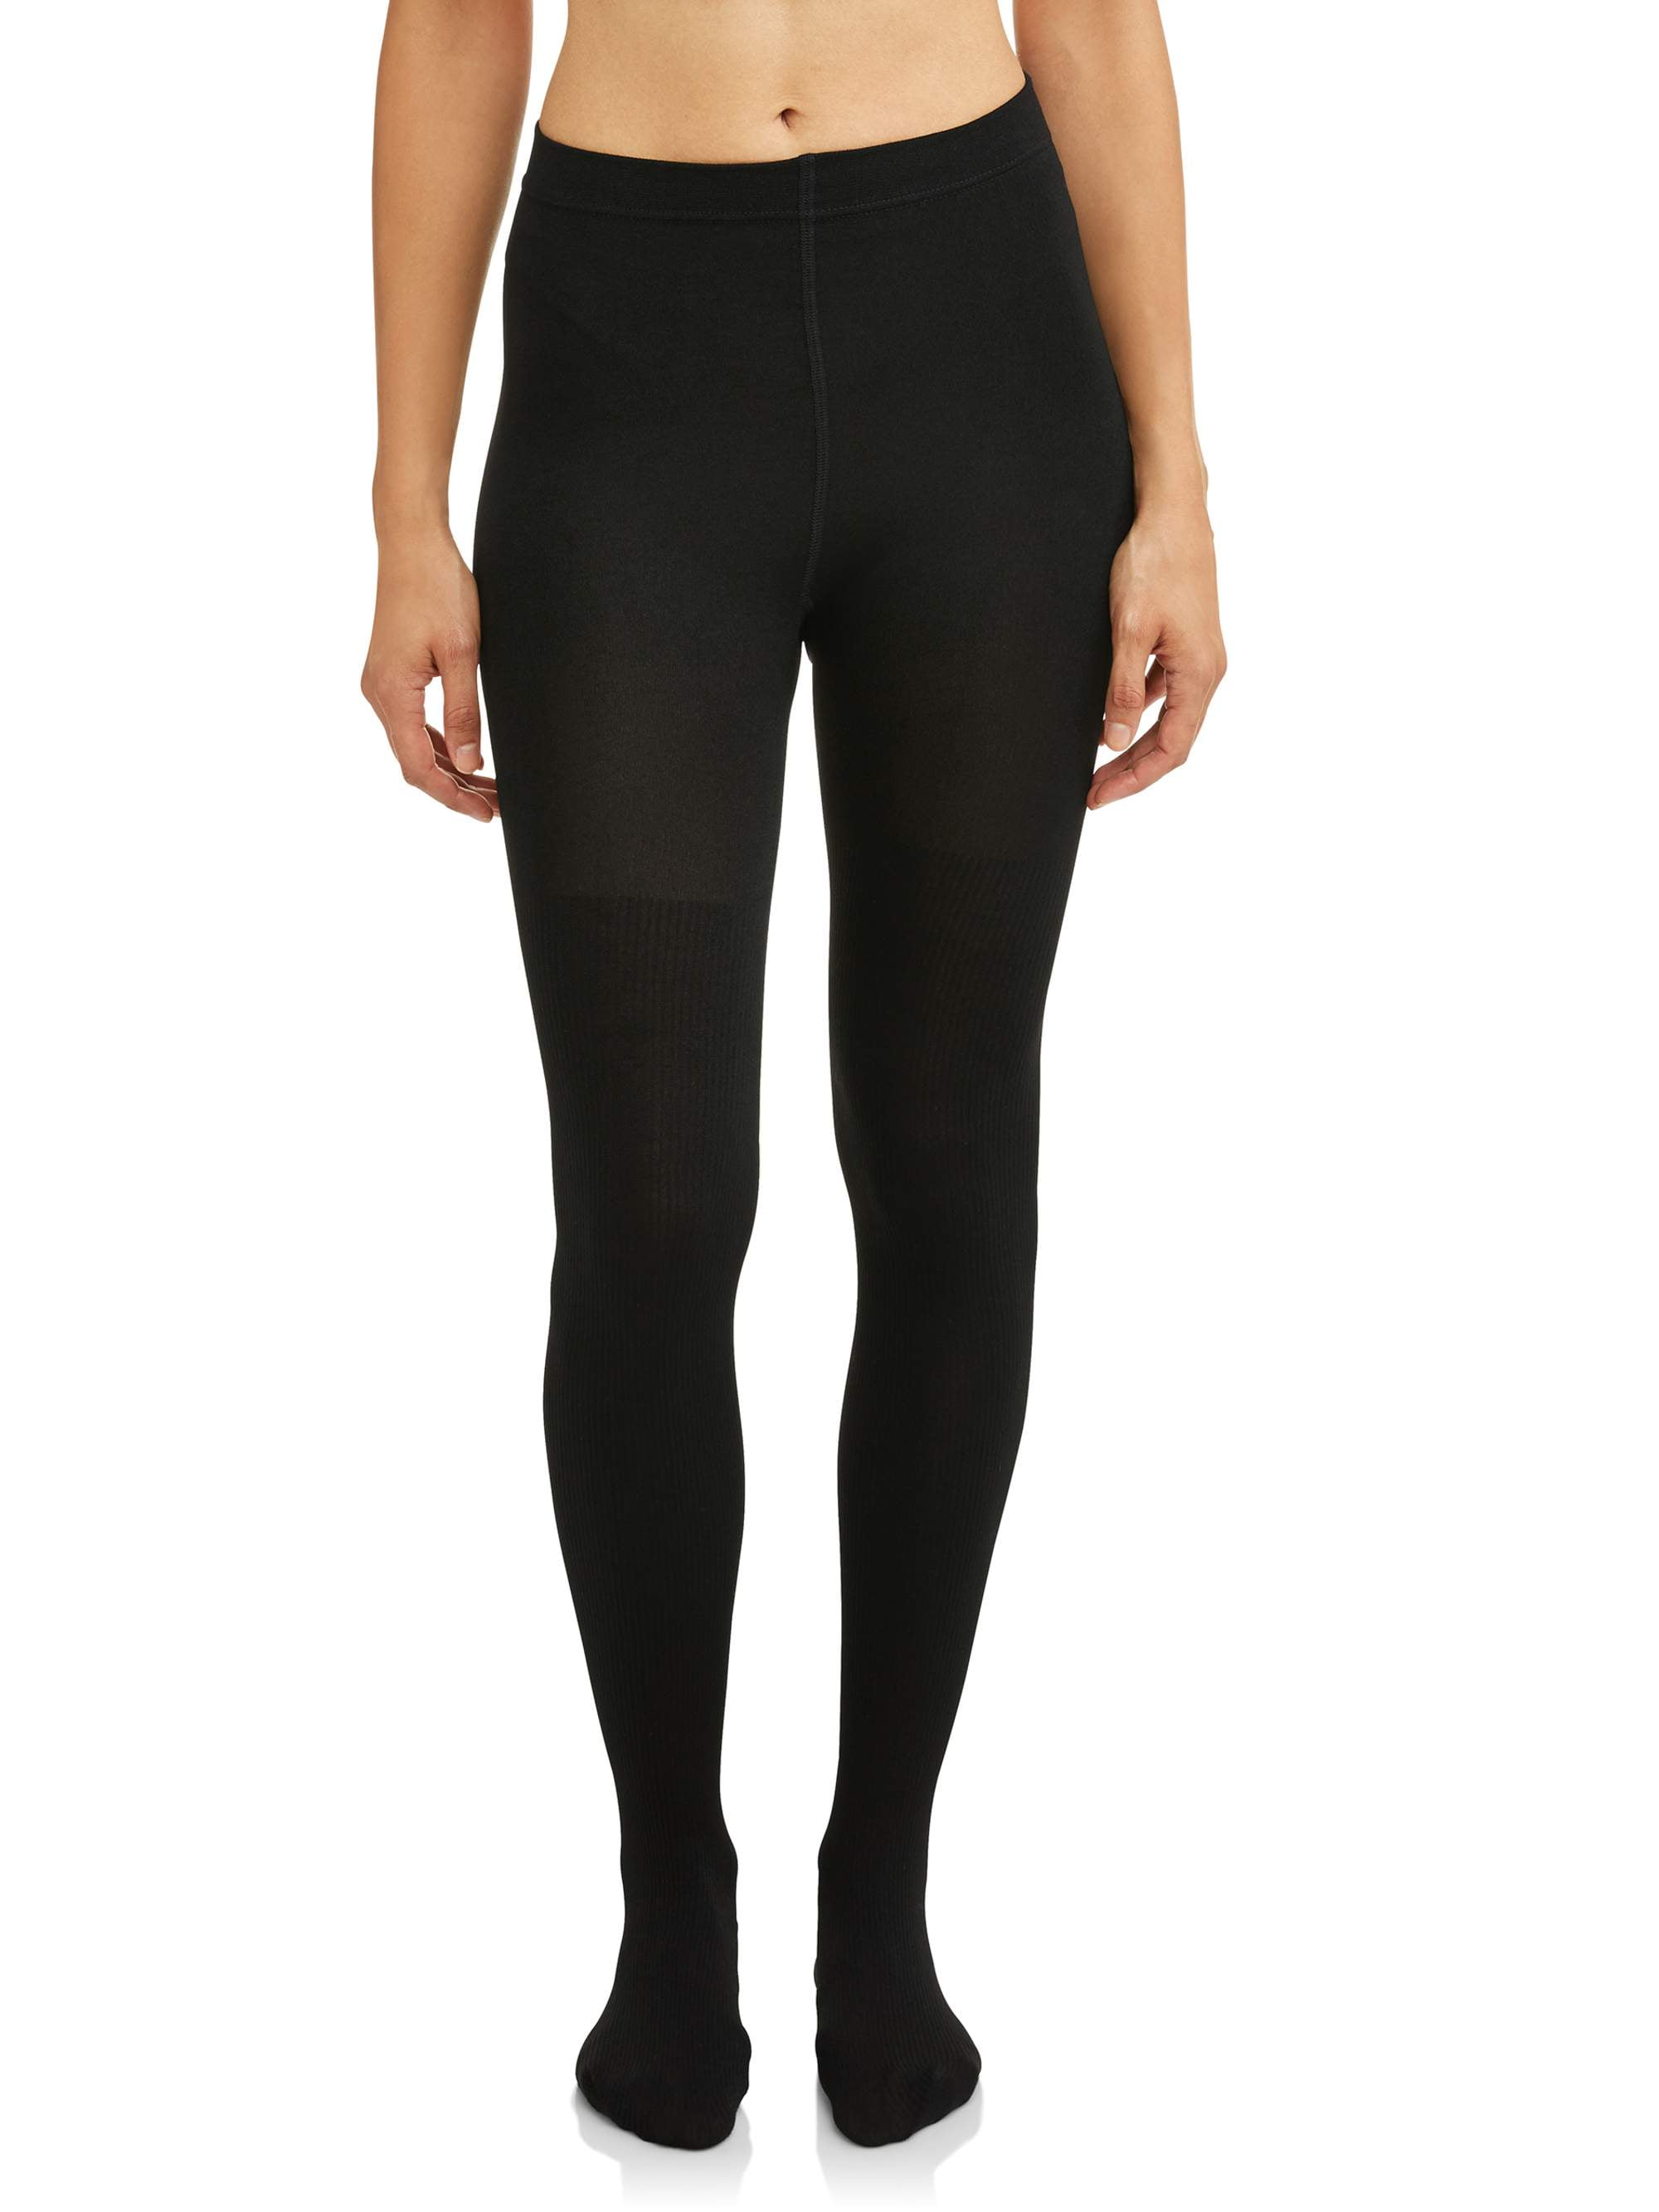 Women's Fleece Lined Ribbed Footed Tights - Walmart.com